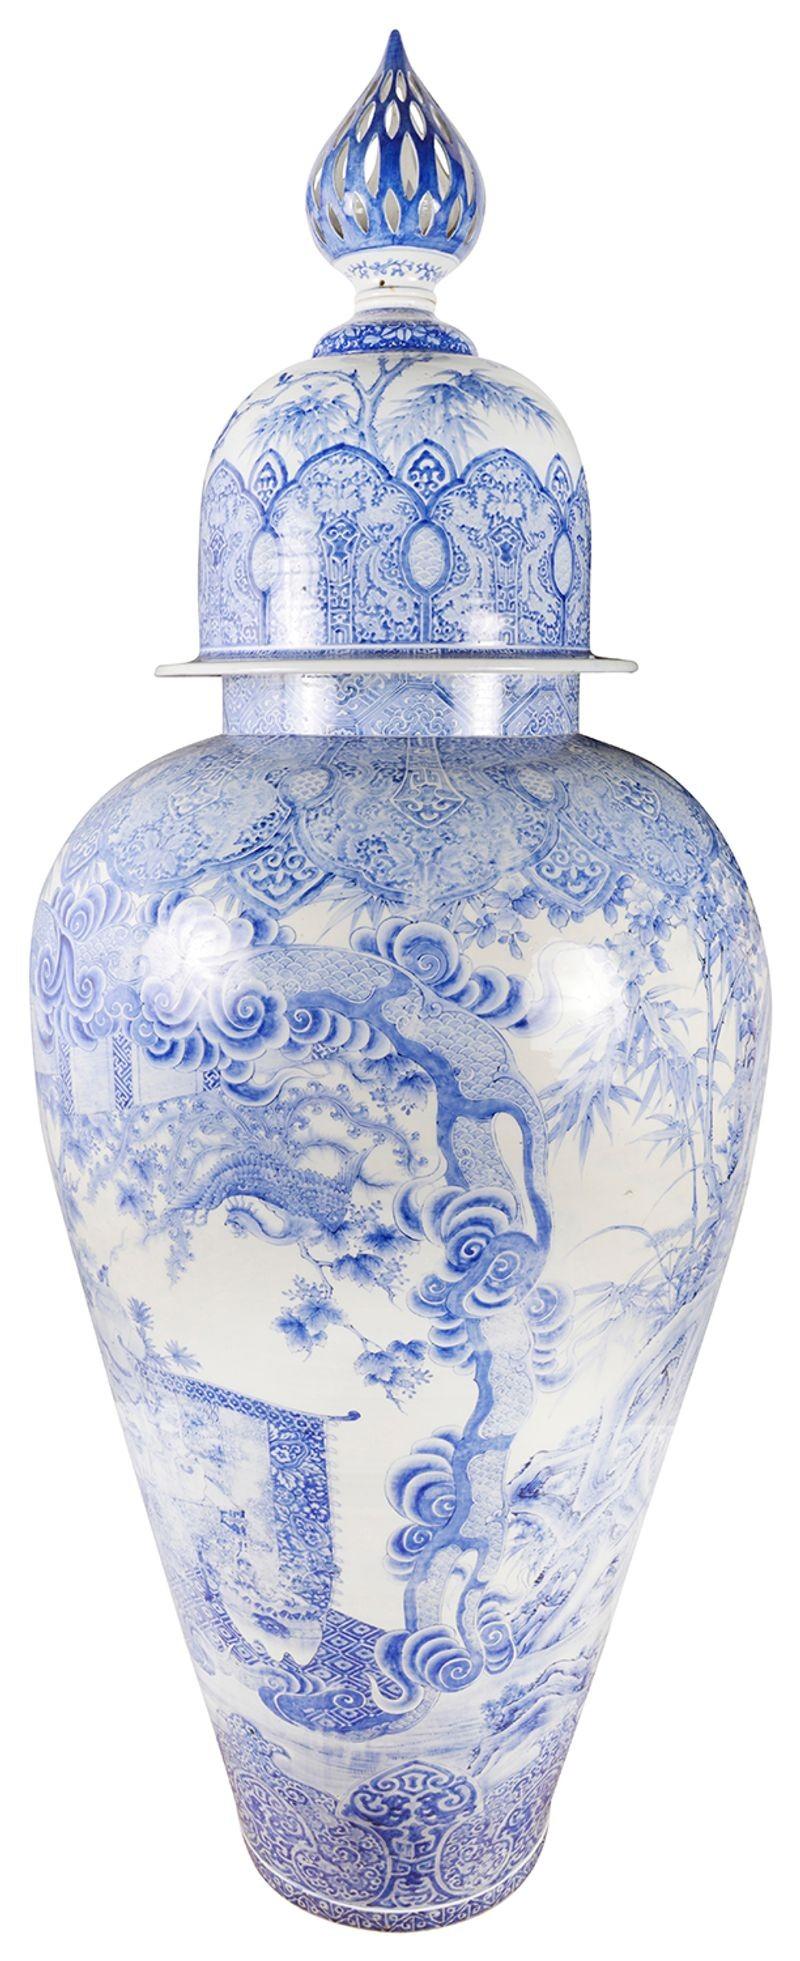 Monumental 19th Century Japanese Blue and White Lidded Palace Vase In Good Condition For Sale In Brighton, Sussex